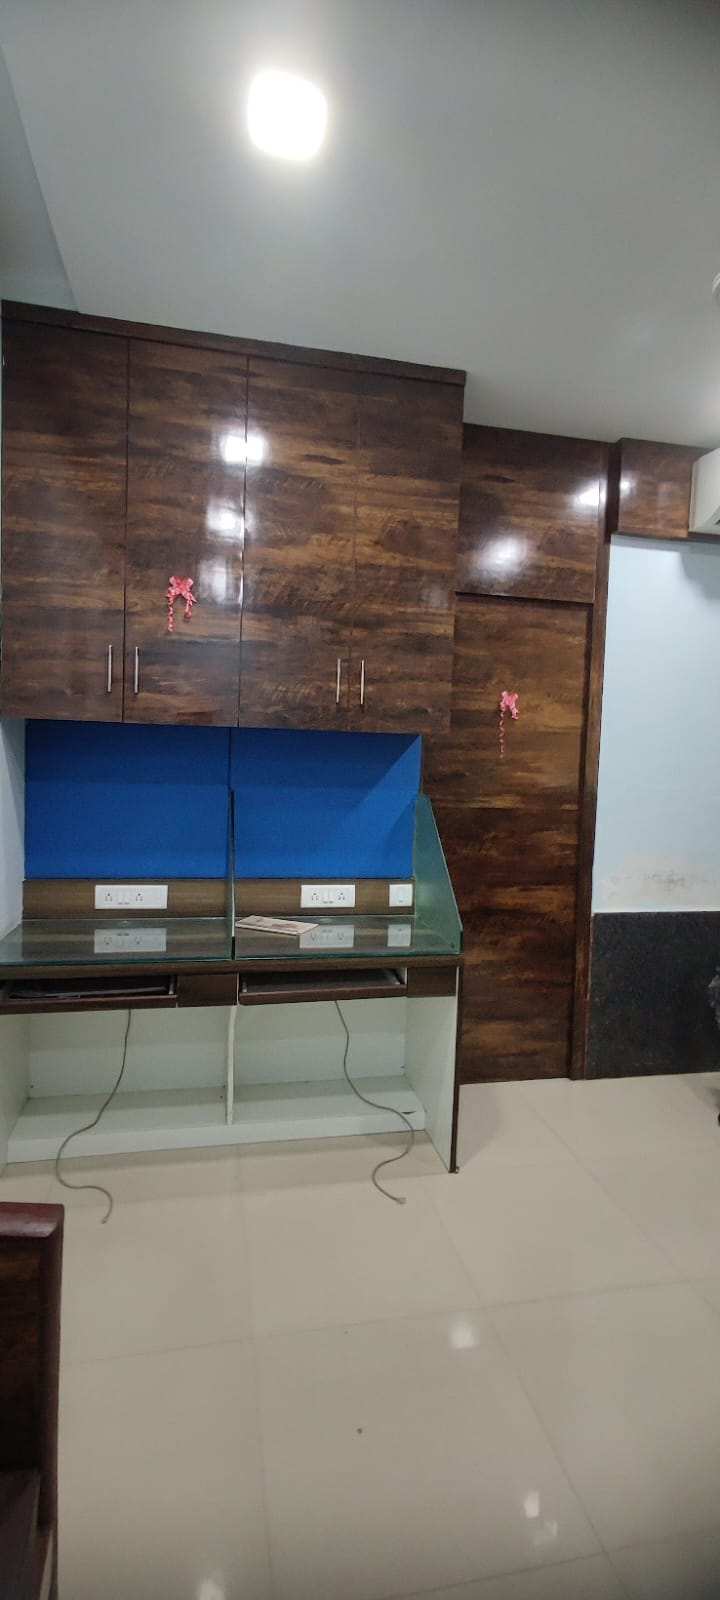 485 Sq. Ft. Furnished Office in Kharghar at a prime Location